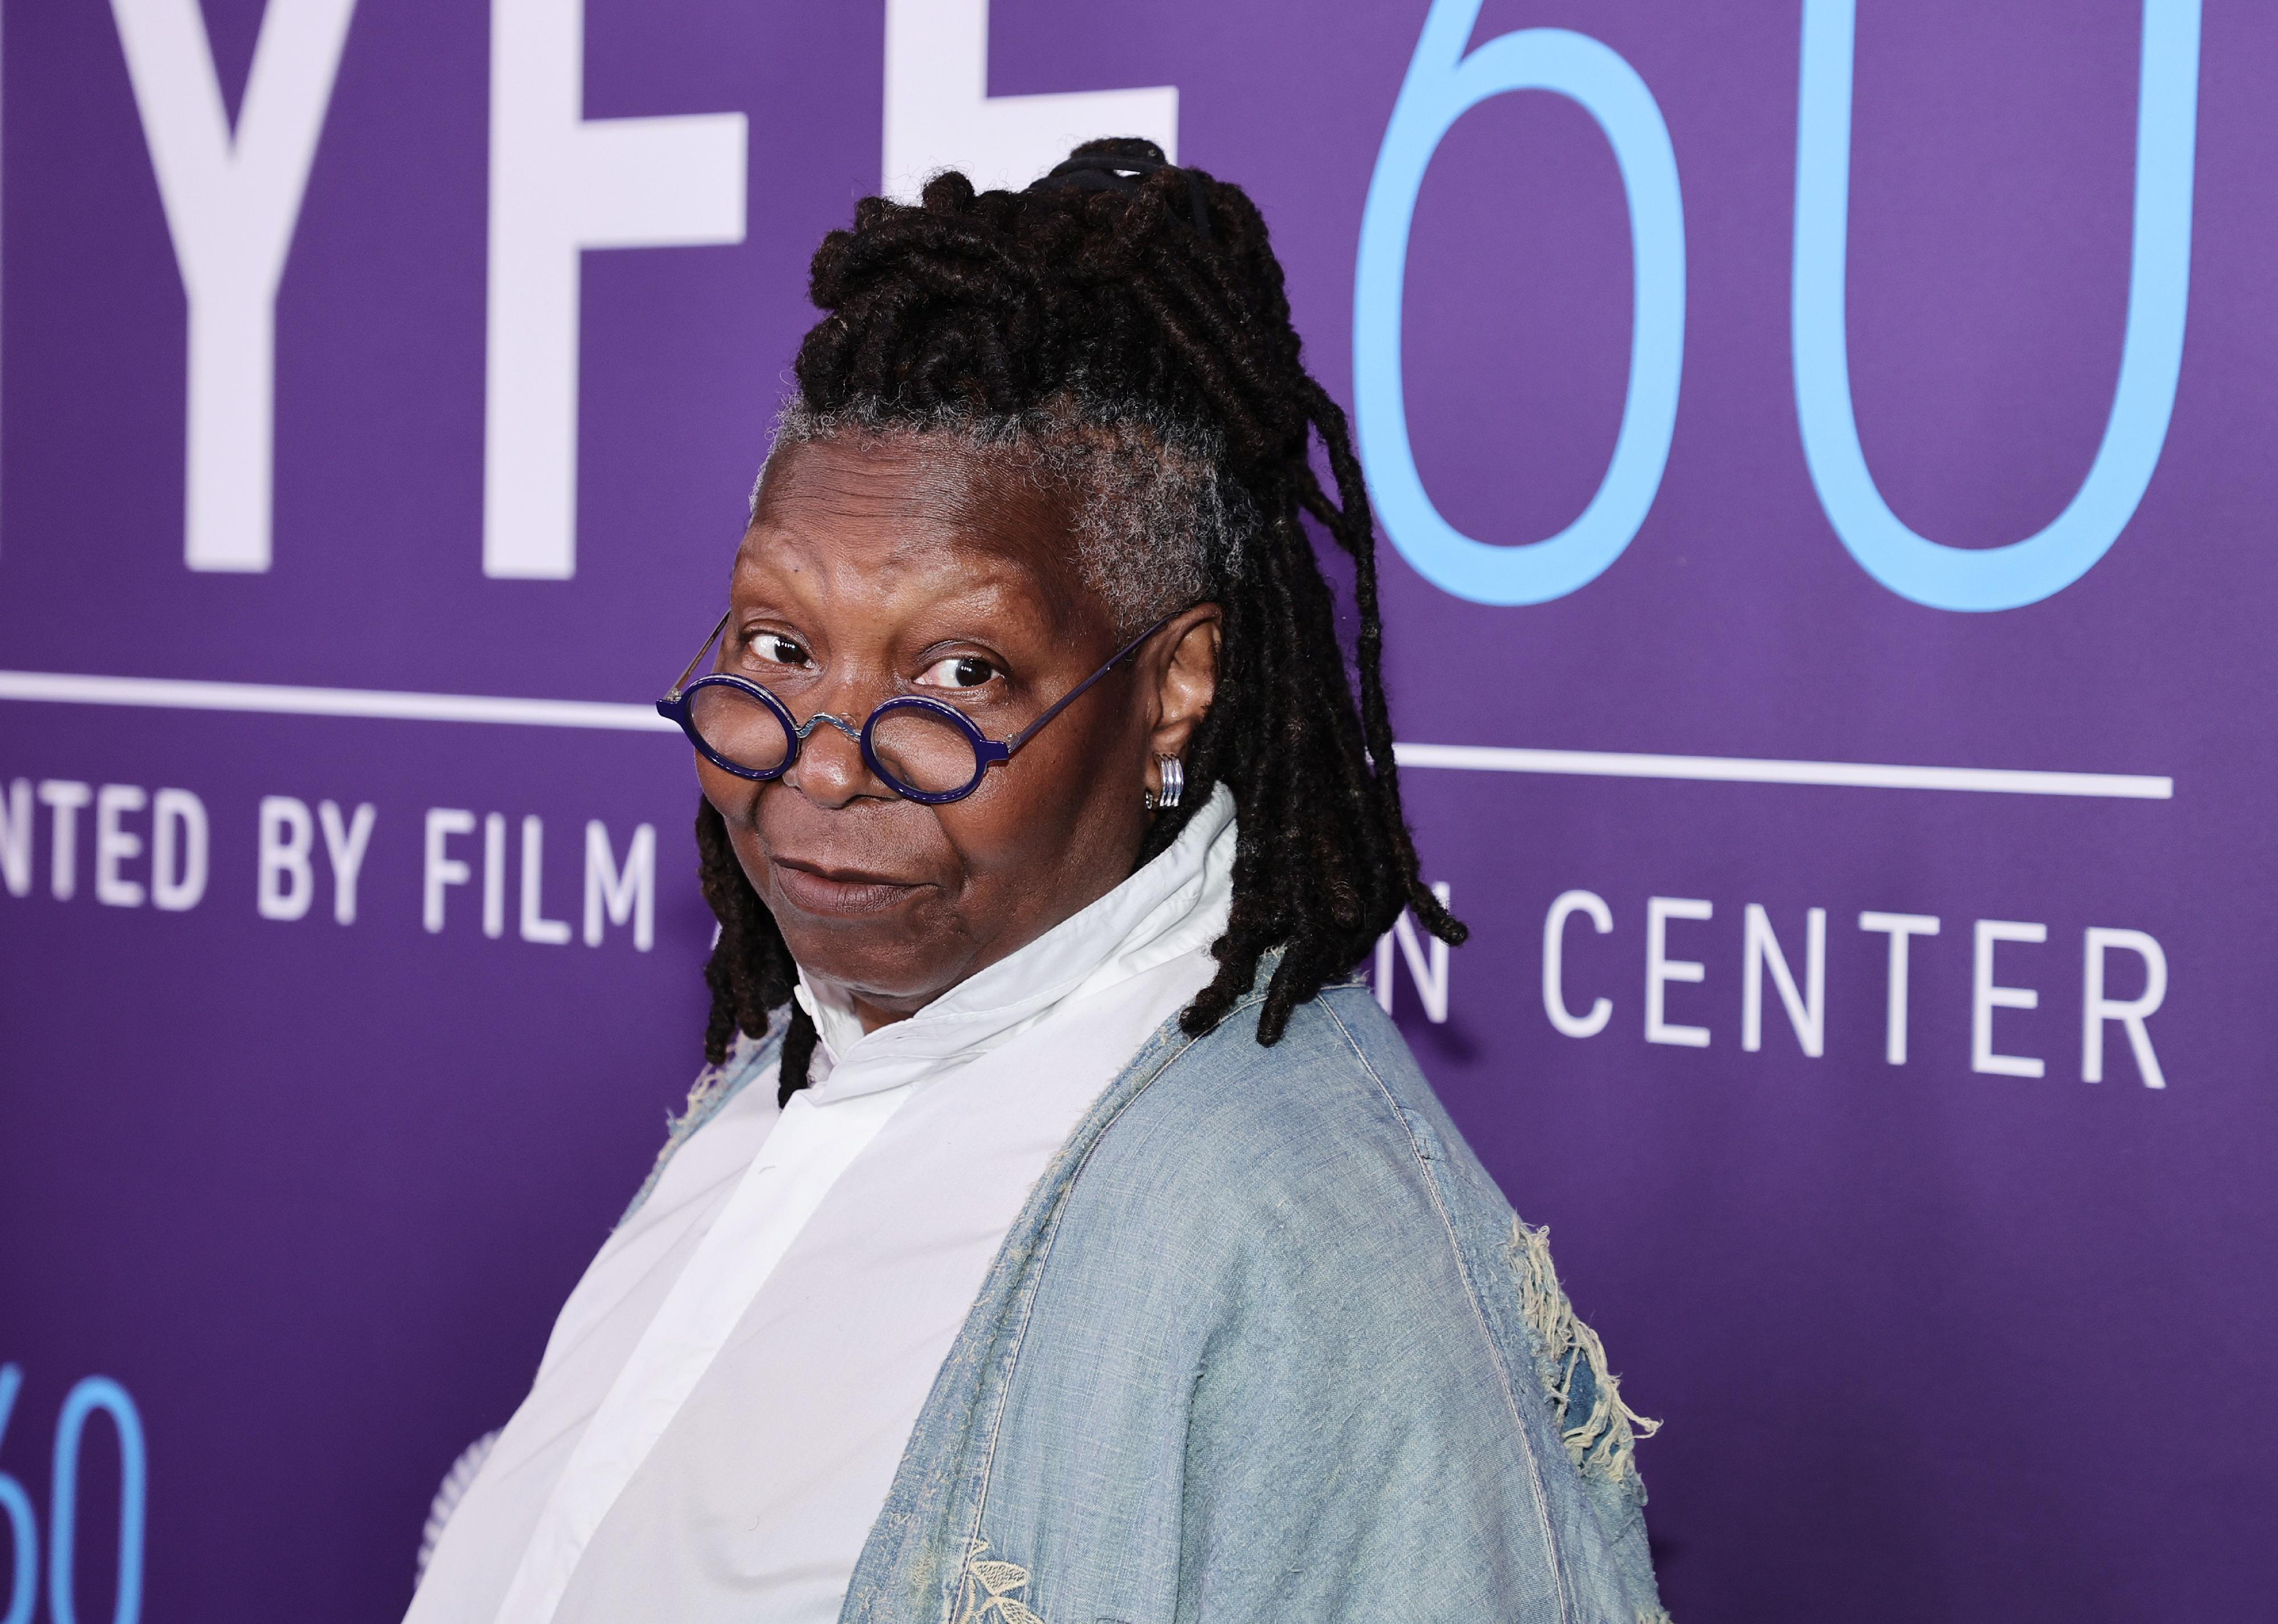 Whoopi Goldberg attends the premiere of "Till" during the 60th New York Film Festival.